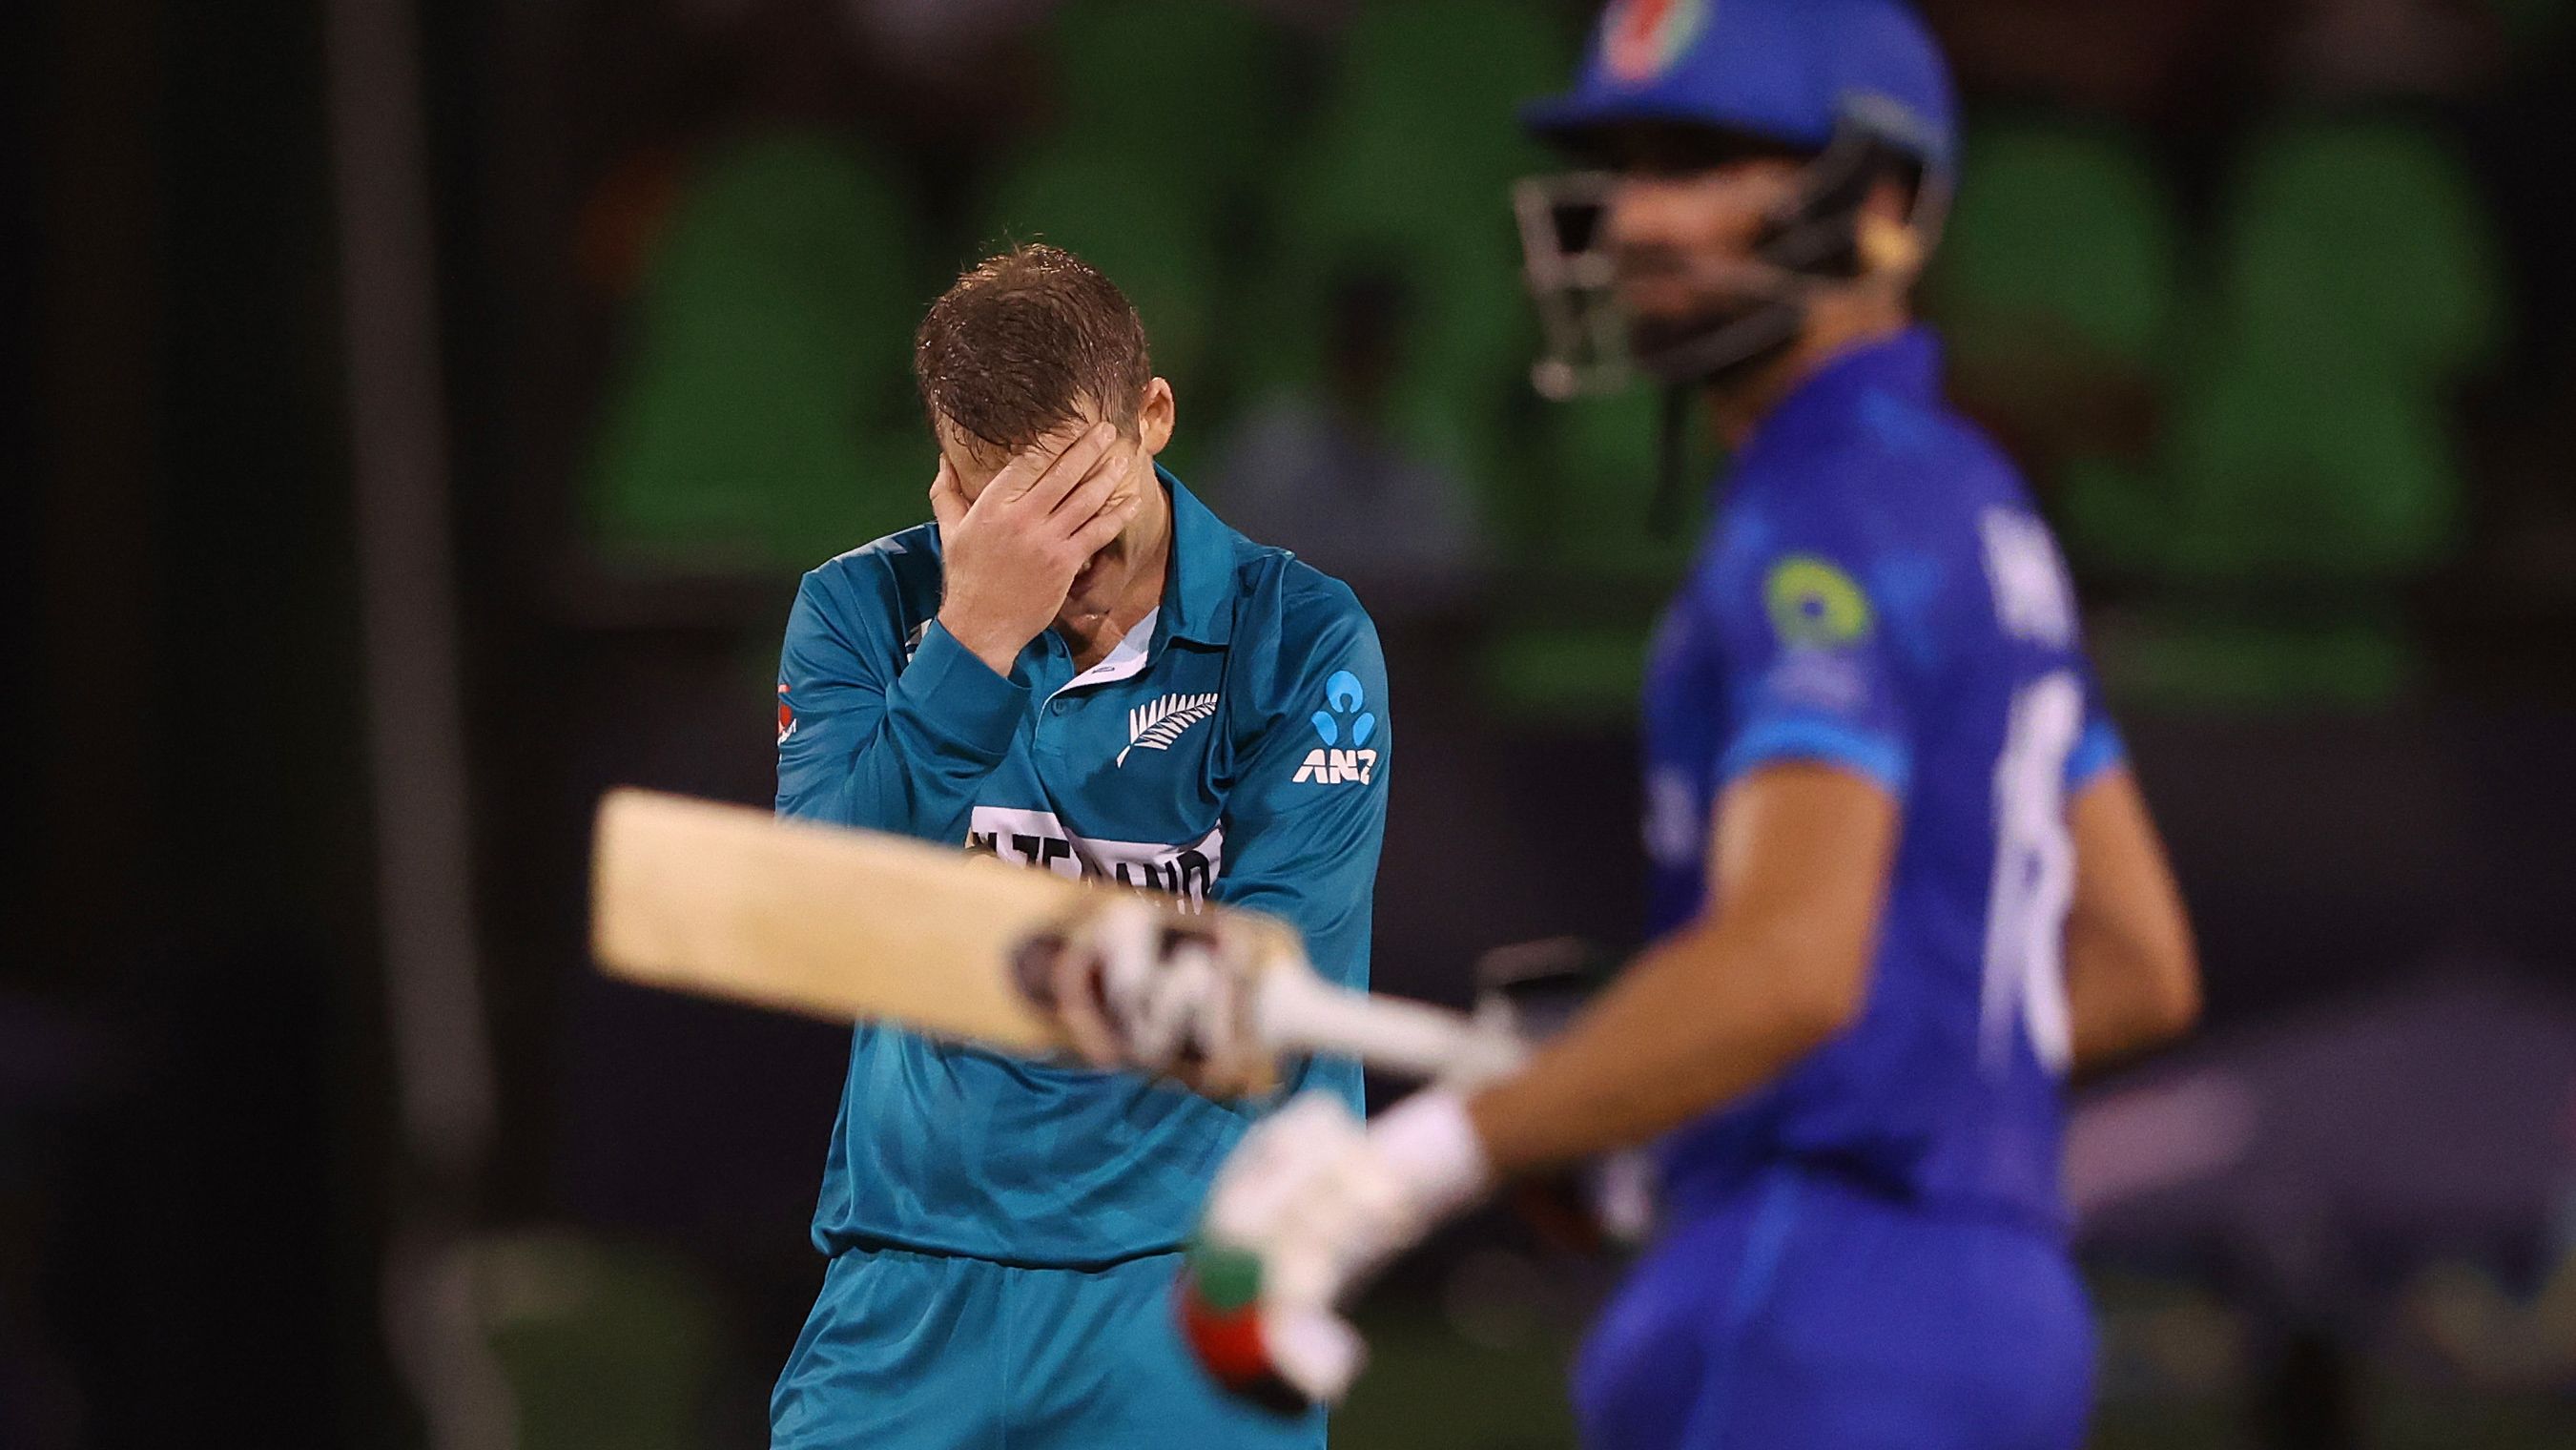 Lockie Ferguson of New Zealand reacts after a delivery.